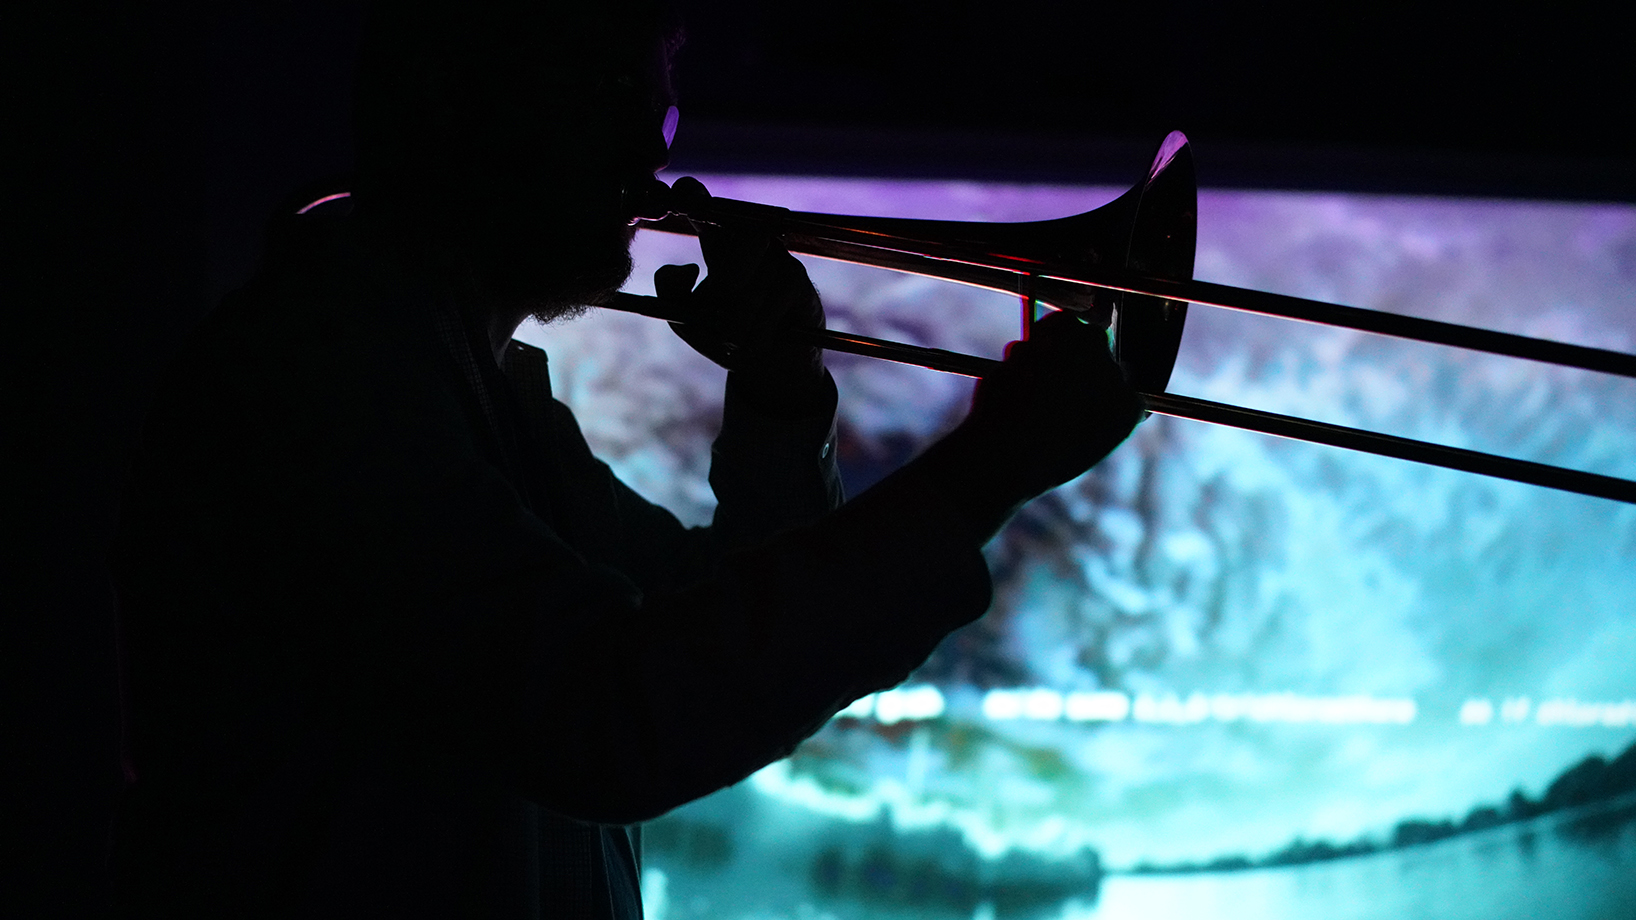 A trombone player plays against a video screen lit with indecipherable text and images